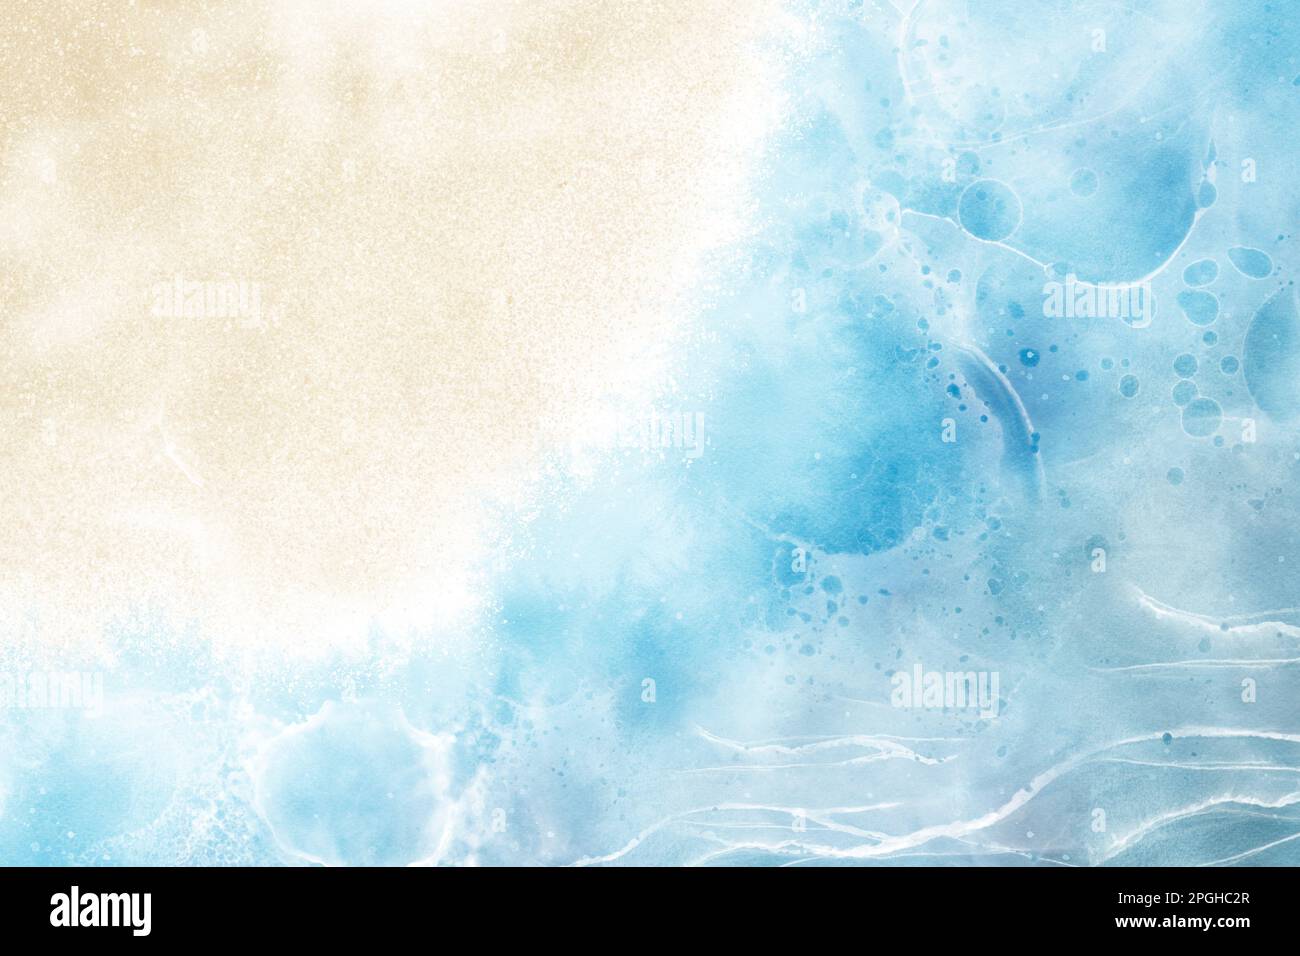 Fluid abstract art designed as a beach landscape with alcohol ink and watercolor painting technique. Suitable for natural background, banner, invitati Stock Photo